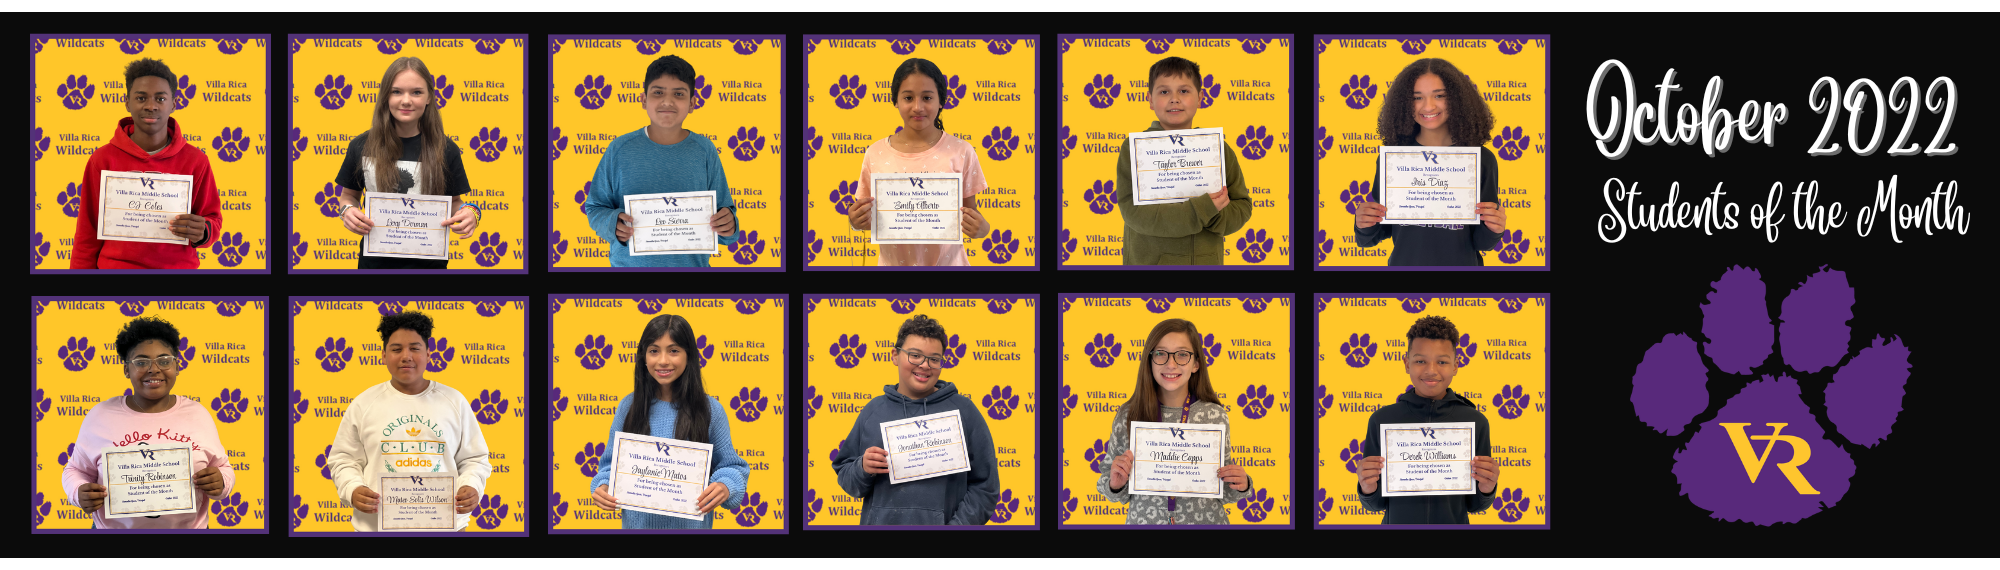 October students of the month are pictured.